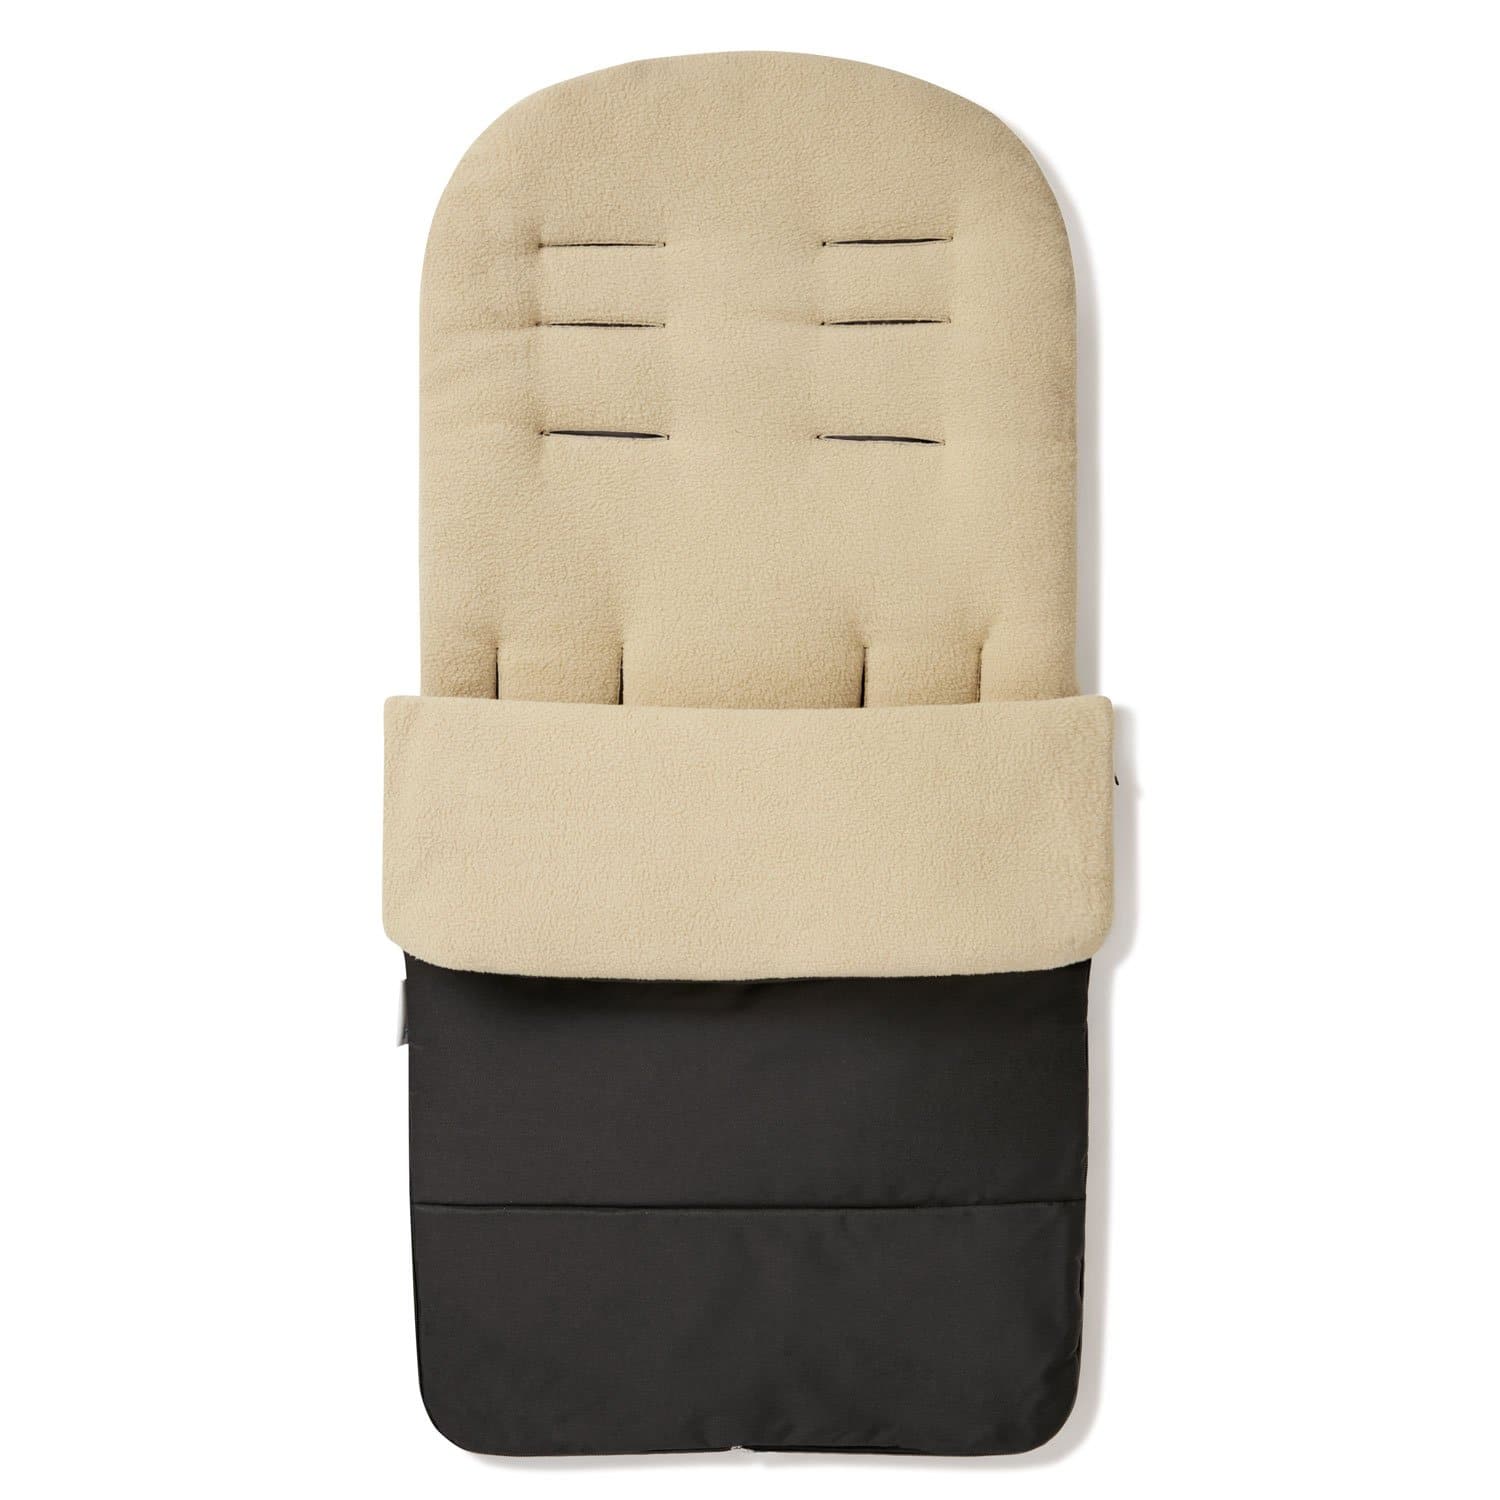 Premium Footmuff / Cosy Toes Compatible with Joie - Desert Sand / Fits All Models | For Your Little One